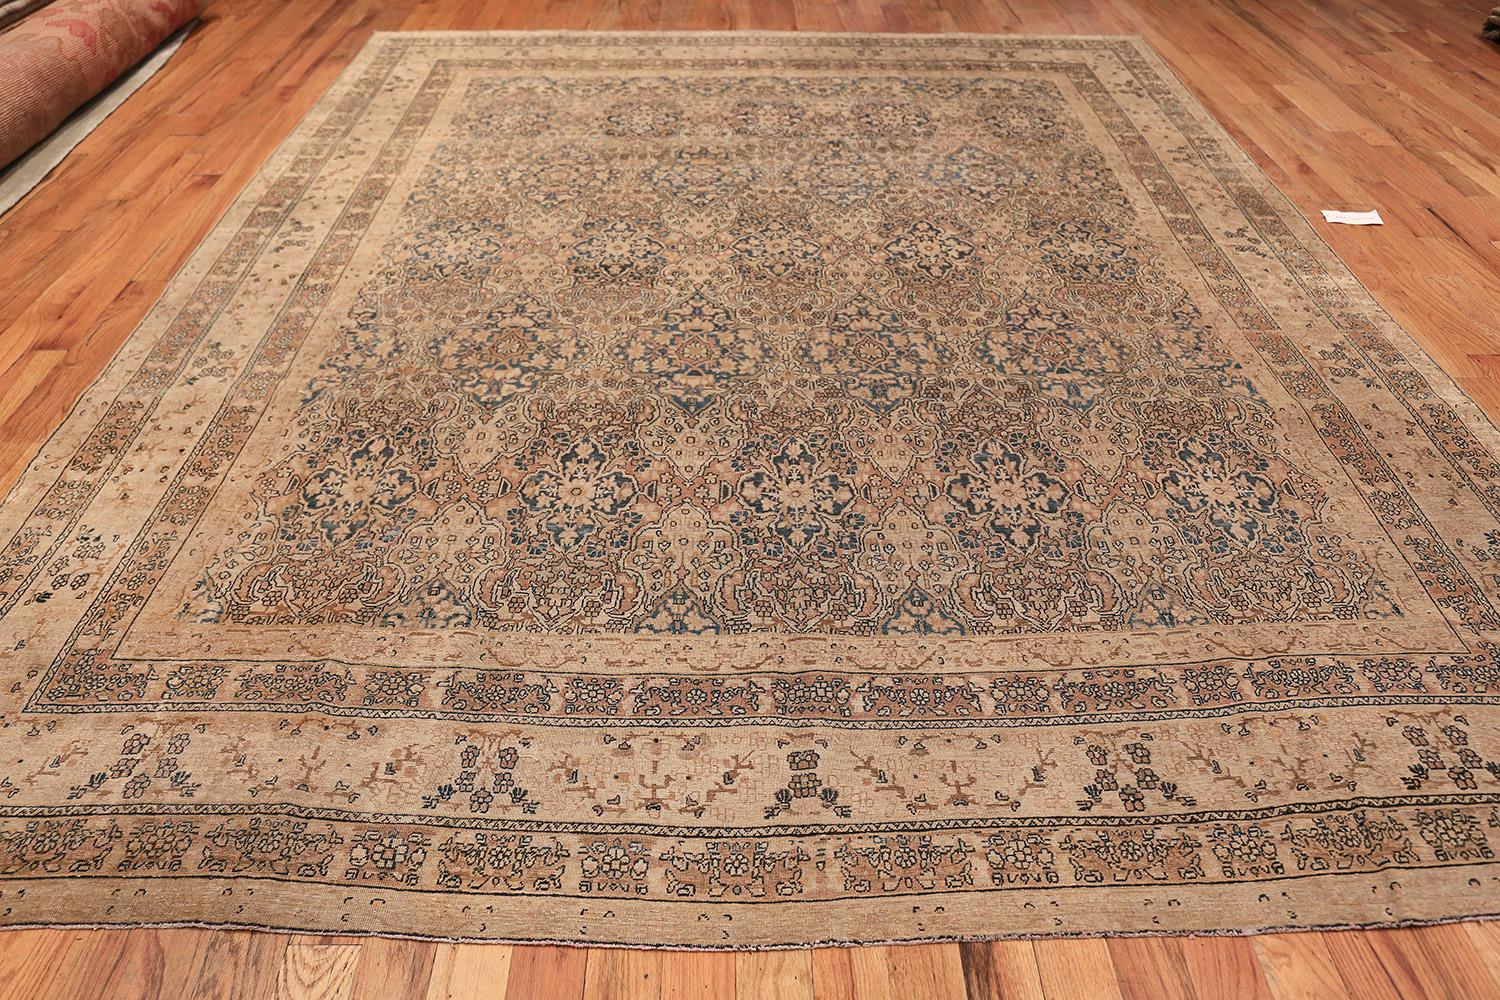 Woven in the Kerman style, this elegant carpet features a tessellating latticework pattern woven in a stunning combination of oxidized Persian blue, camel and golden-brown.

Beautiful Decorative and Finely Woven Antique Room Size Persian Kerman